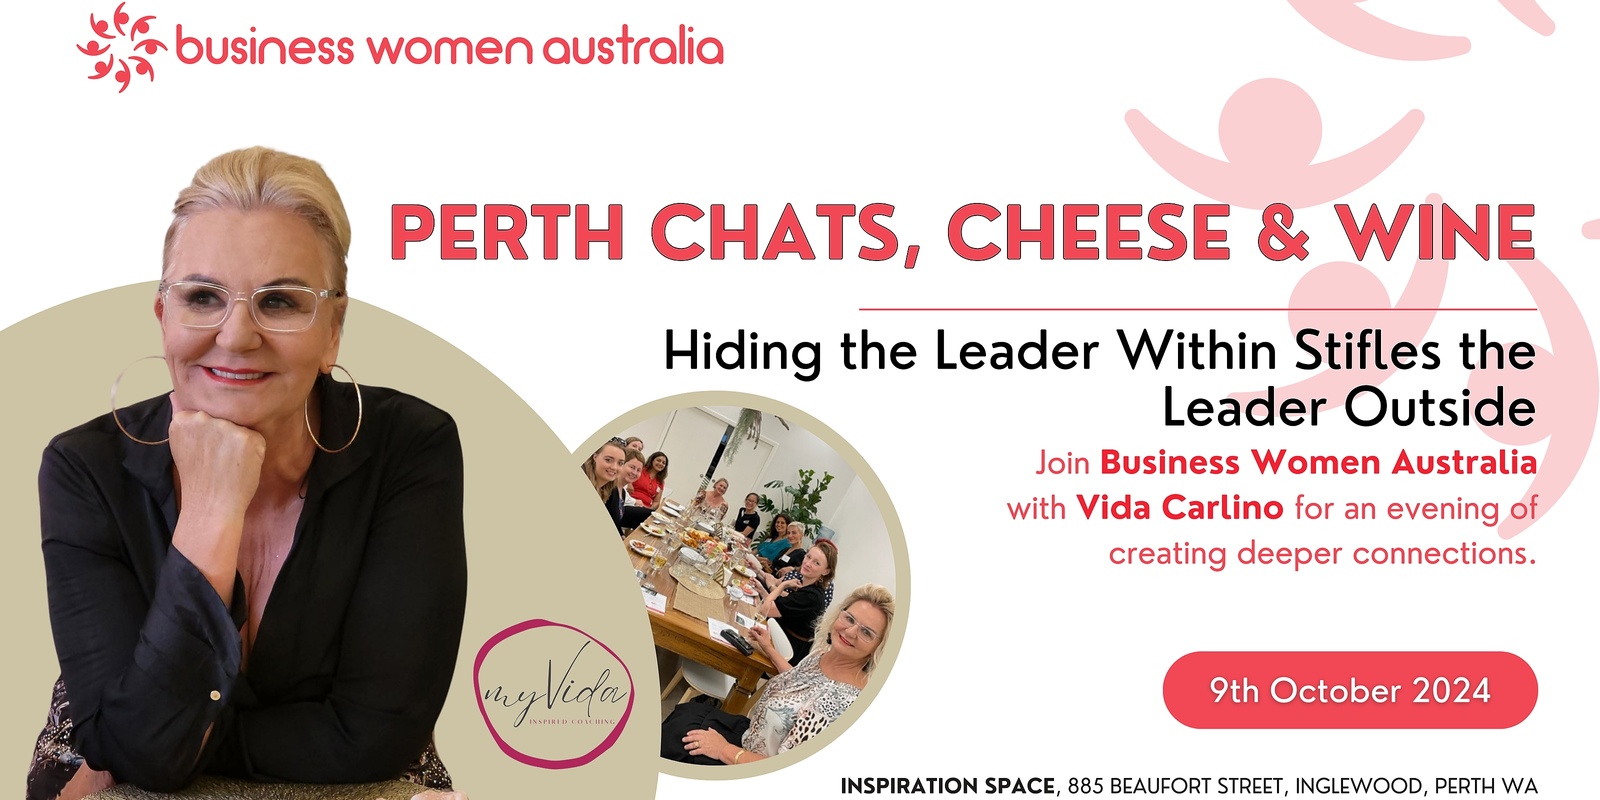 Banner image for Perth, Chats, Cheese and Wine: Hiding the Leader Within Stifles the Leader Outside